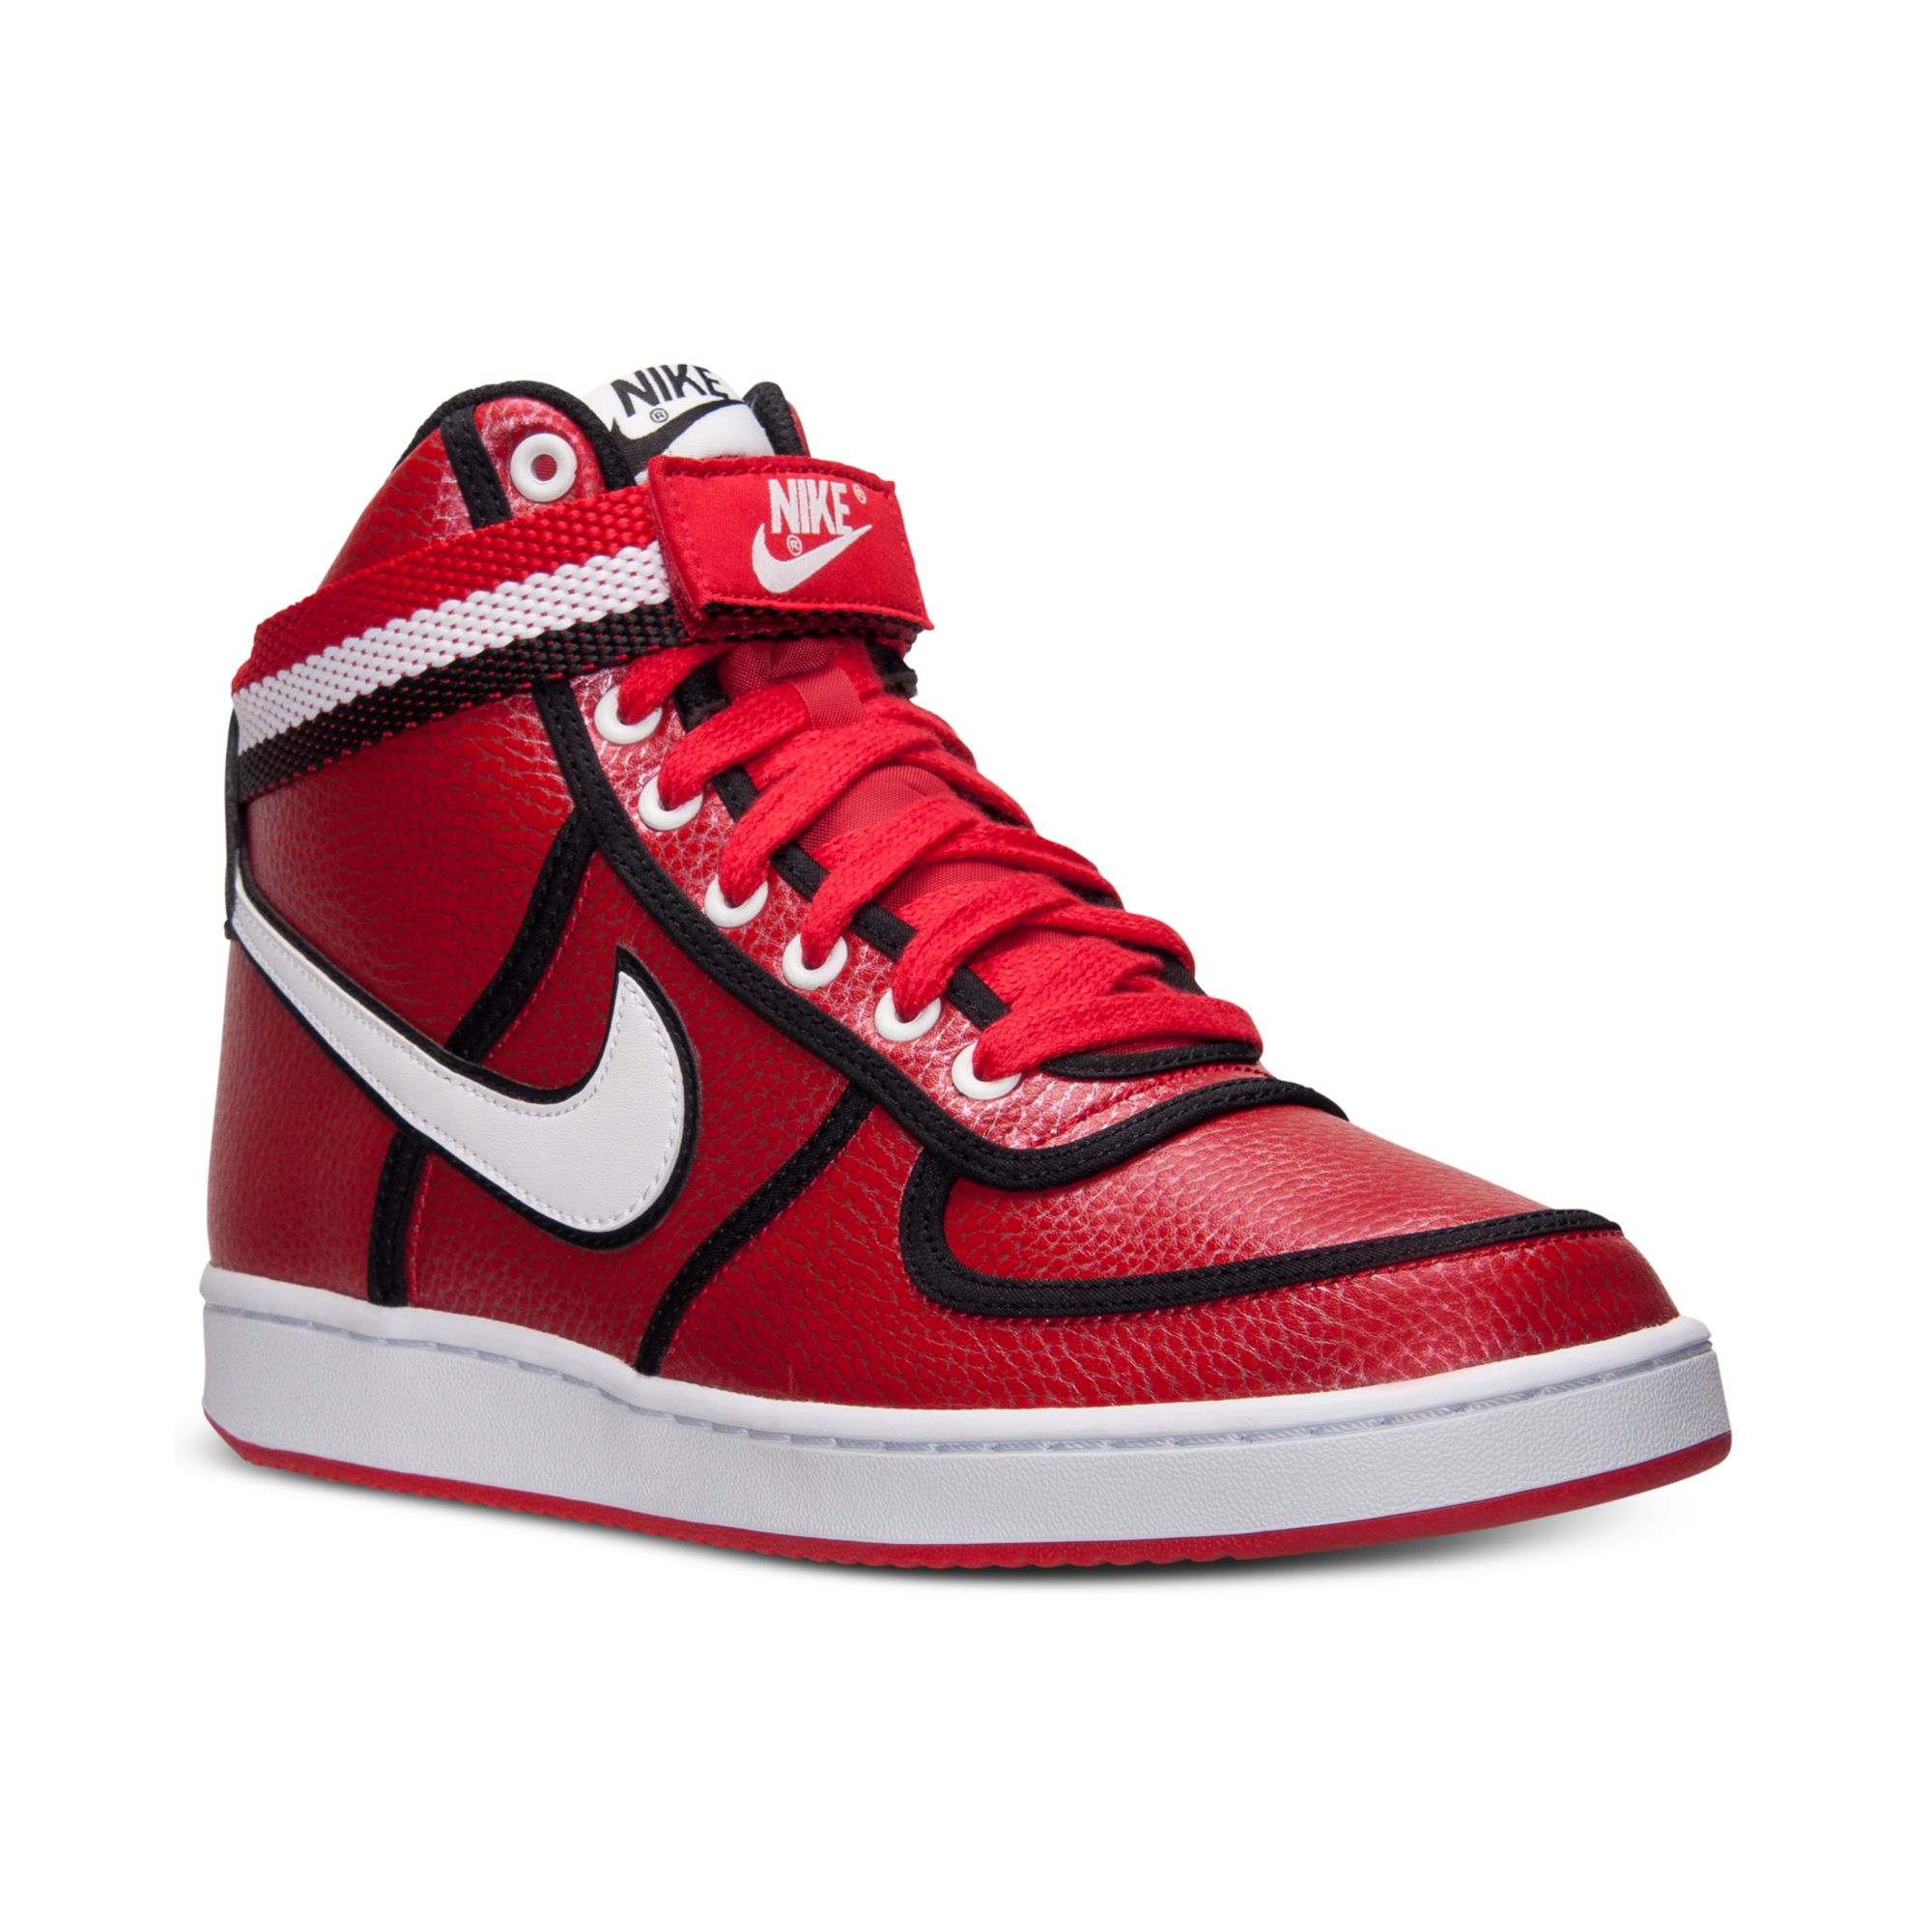 Nike Mens Vandal High Casual Sneakers From Finish Line in ...